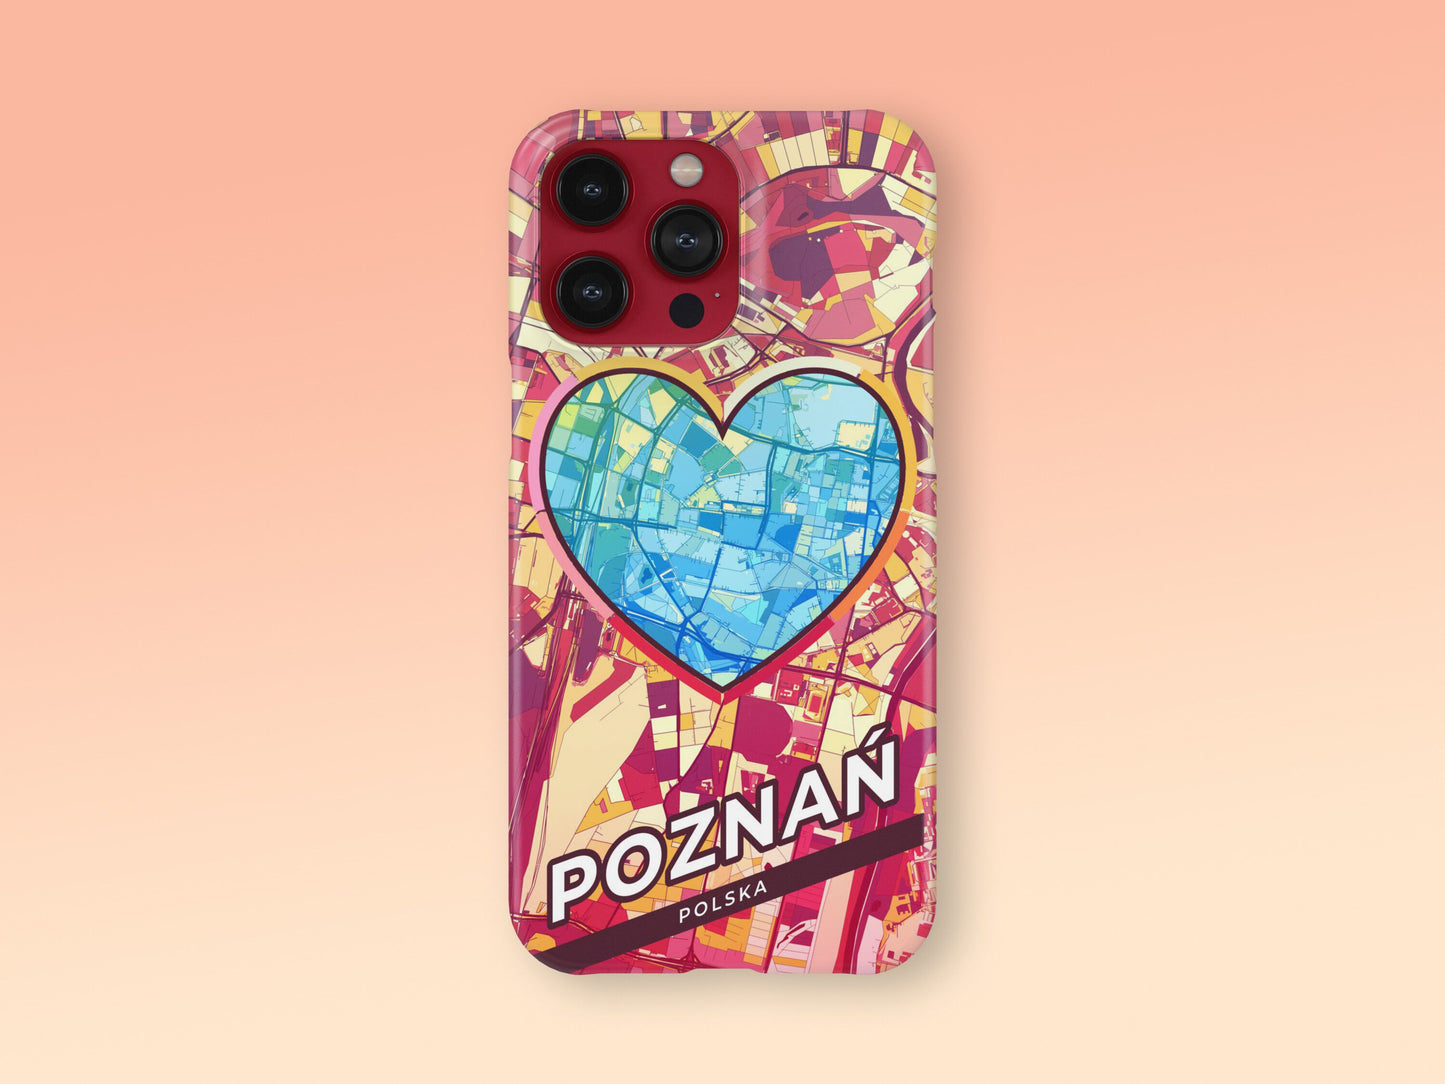 Poznań Poland slim phone case with colorful icon. Birthday, wedding or housewarming gift. Couple match cases. 2